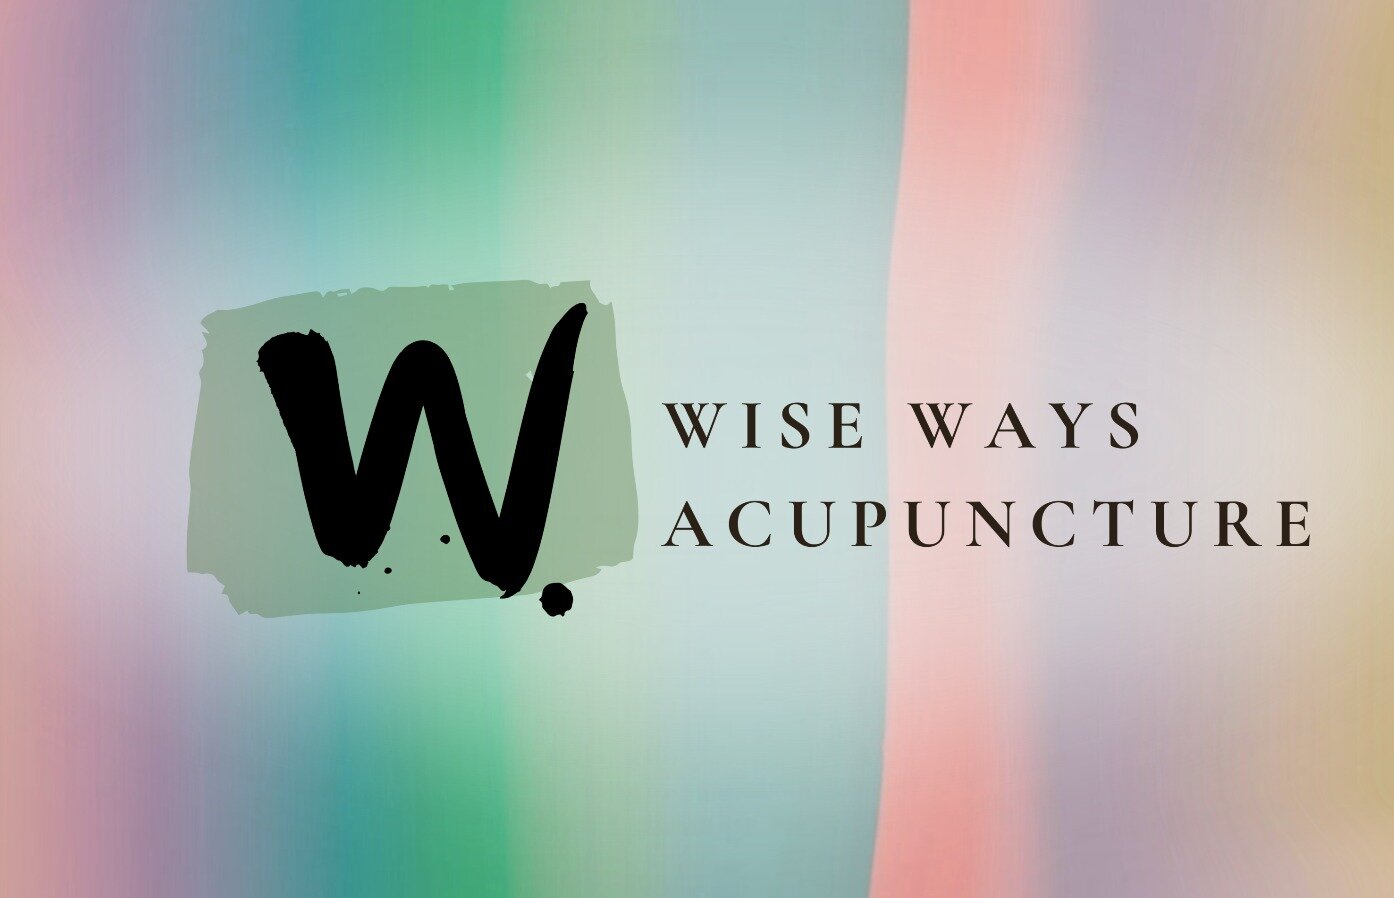 WWA website got a glamp up! Go check it out and let me know what you think. 
Link in bio 🤩🥰 

#lakeviewchicago #lakeview #chicago #Chicago #chicagoacupunctureclinic #acupuncturist #acupunctureworks #acu #HolisticHealing #AcuPeace #chicagoacupunctur